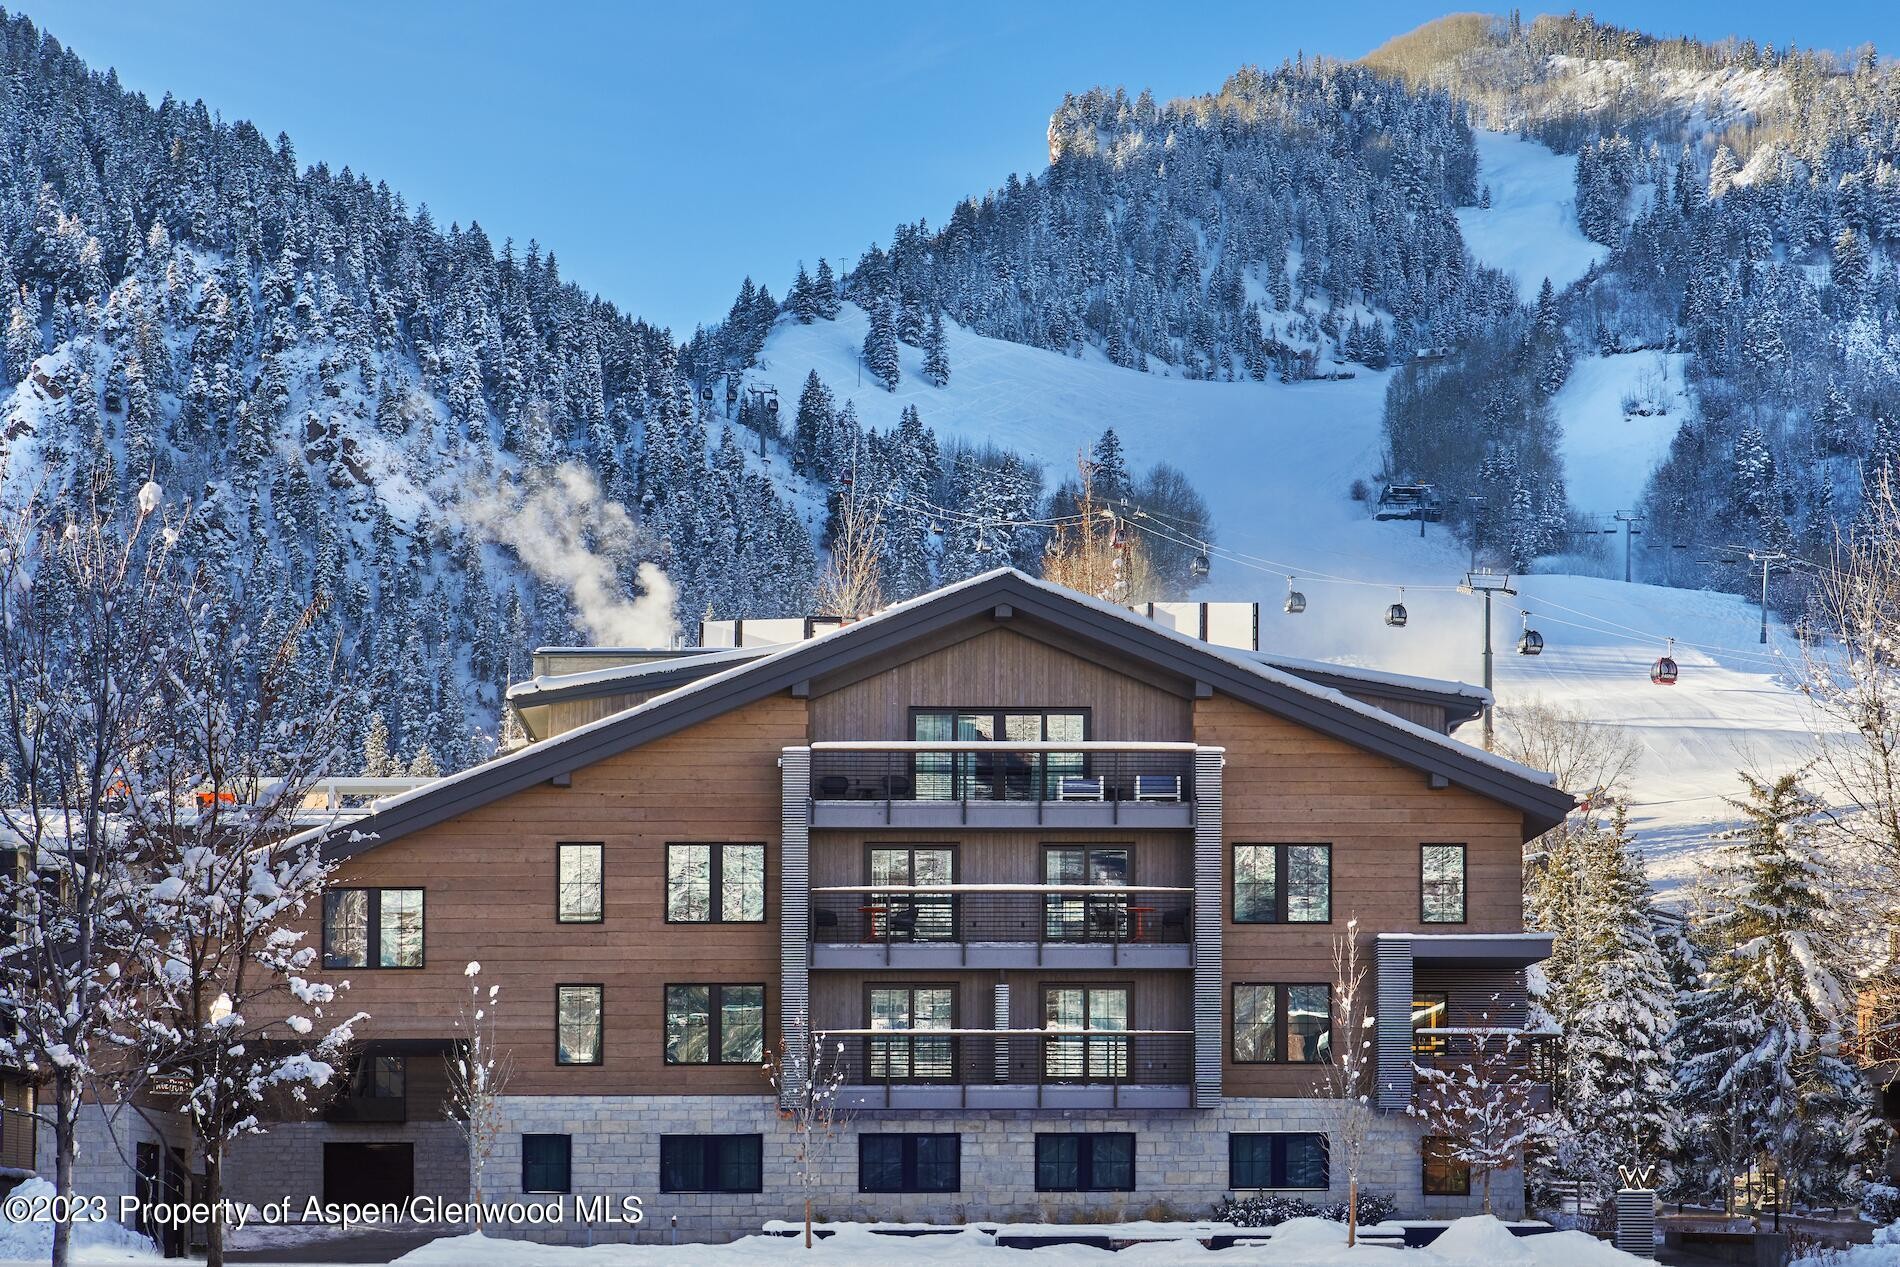 550 S Spring #F2-9 : a Luxury Fractional Ownership Property for Sale - Aspen, Colorado